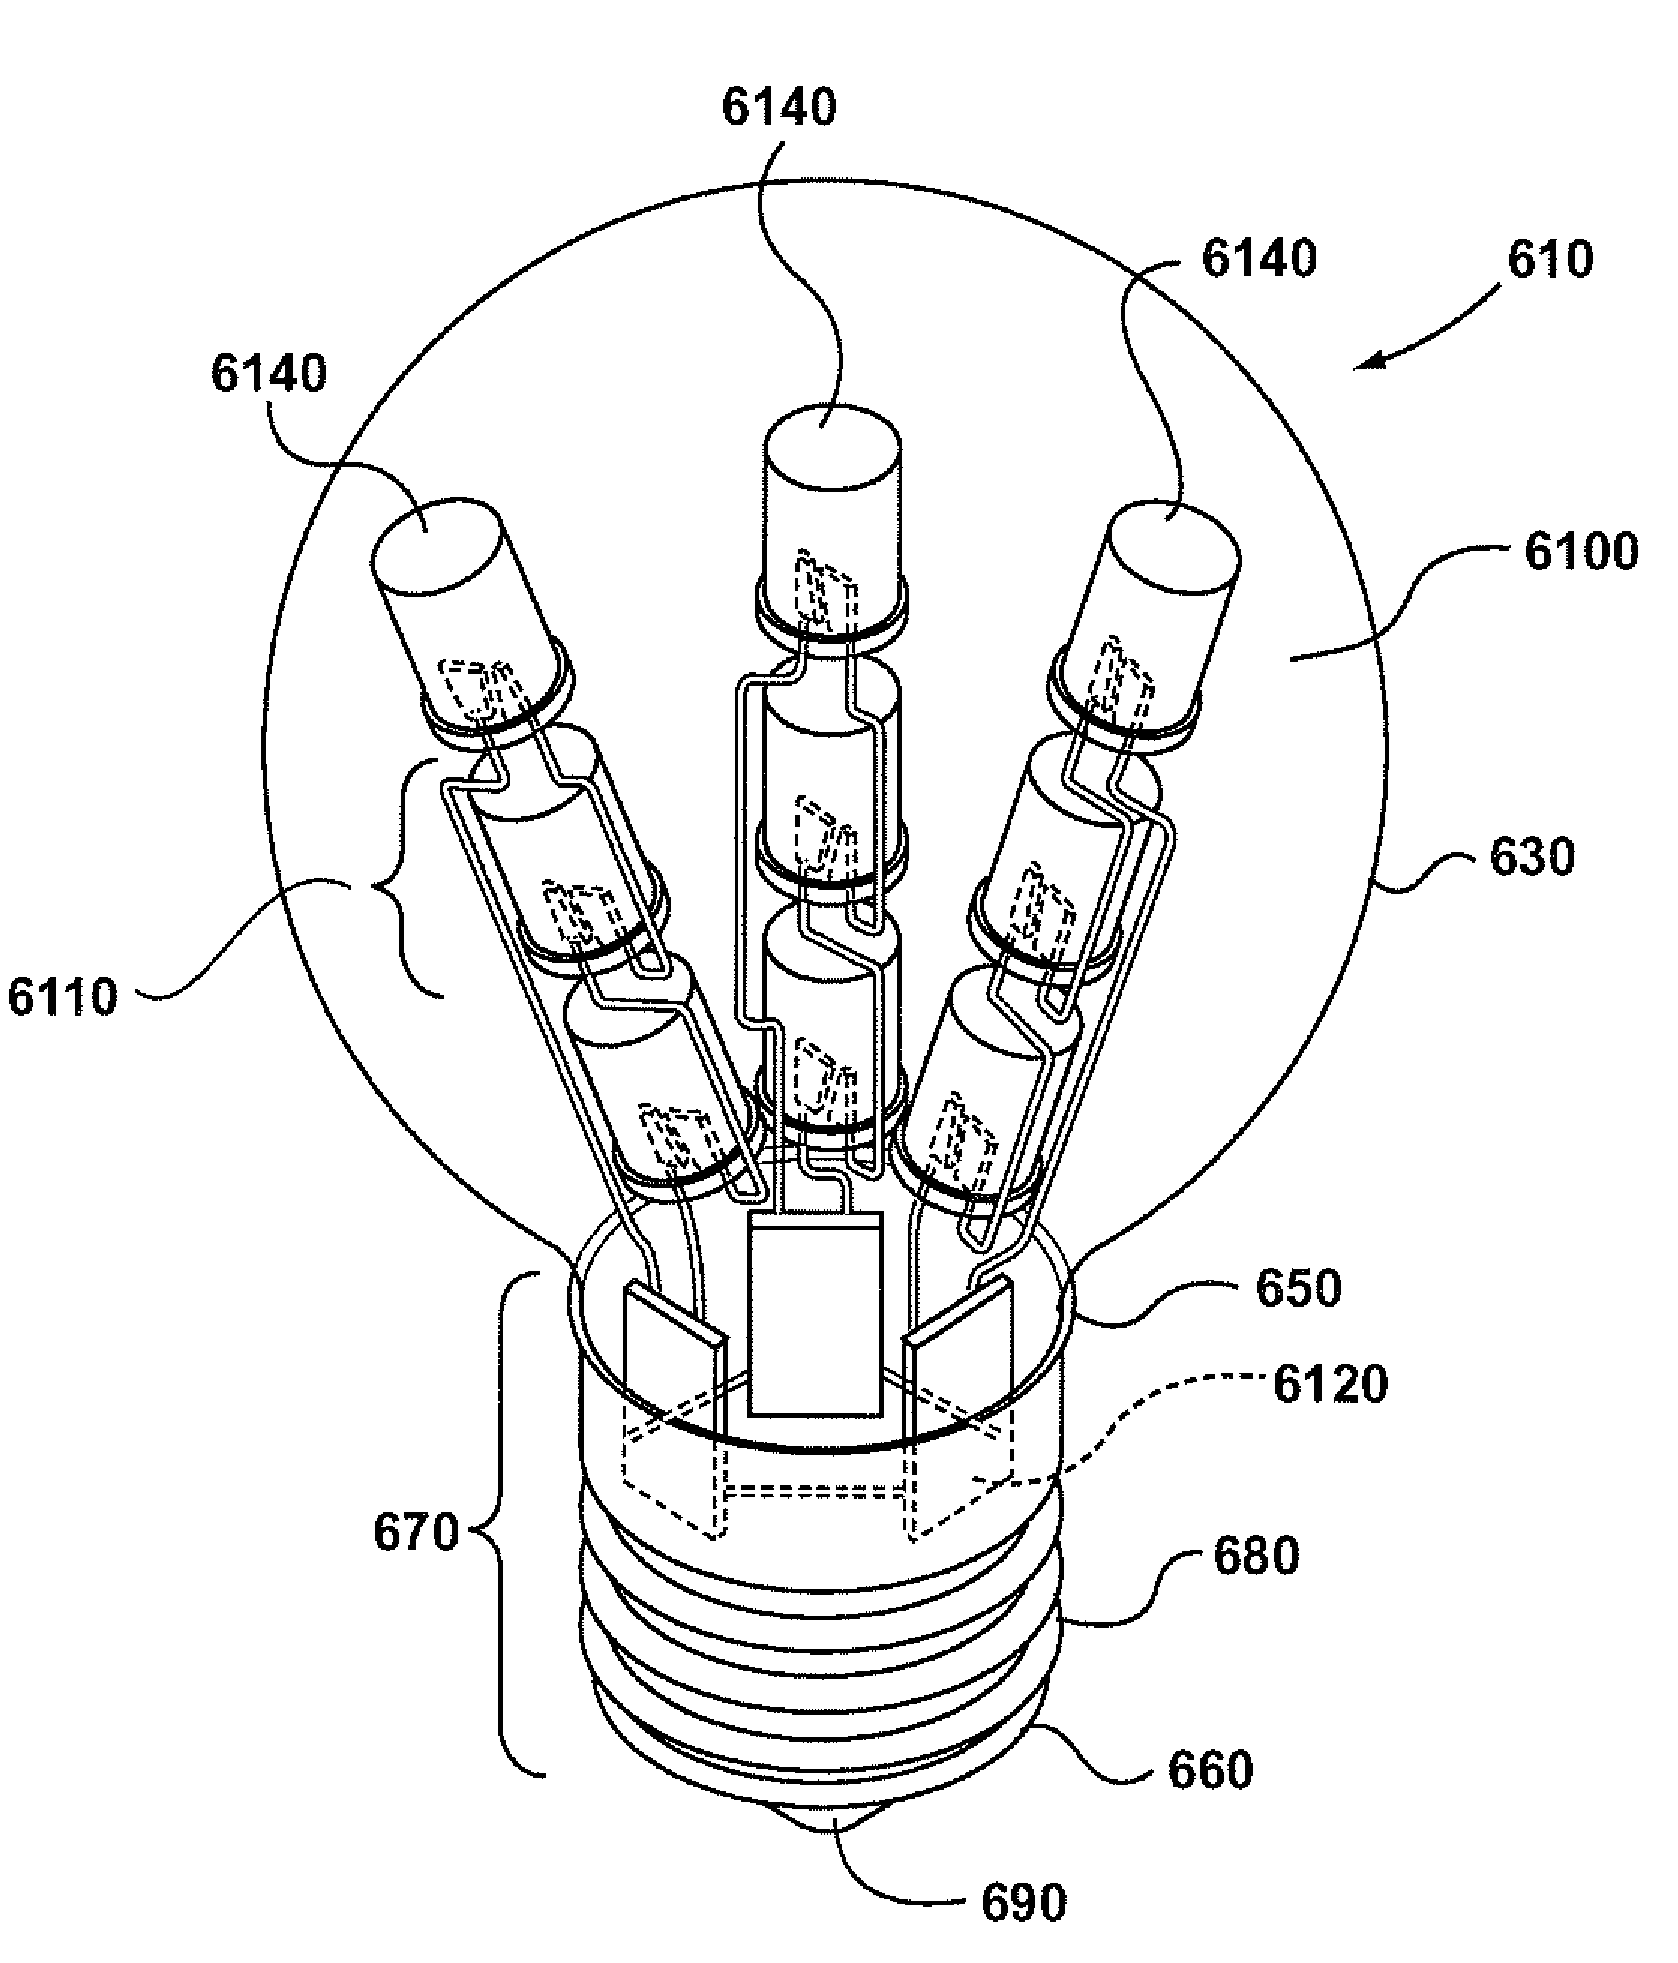 Light emitting diode light bulbs with strands of LED's